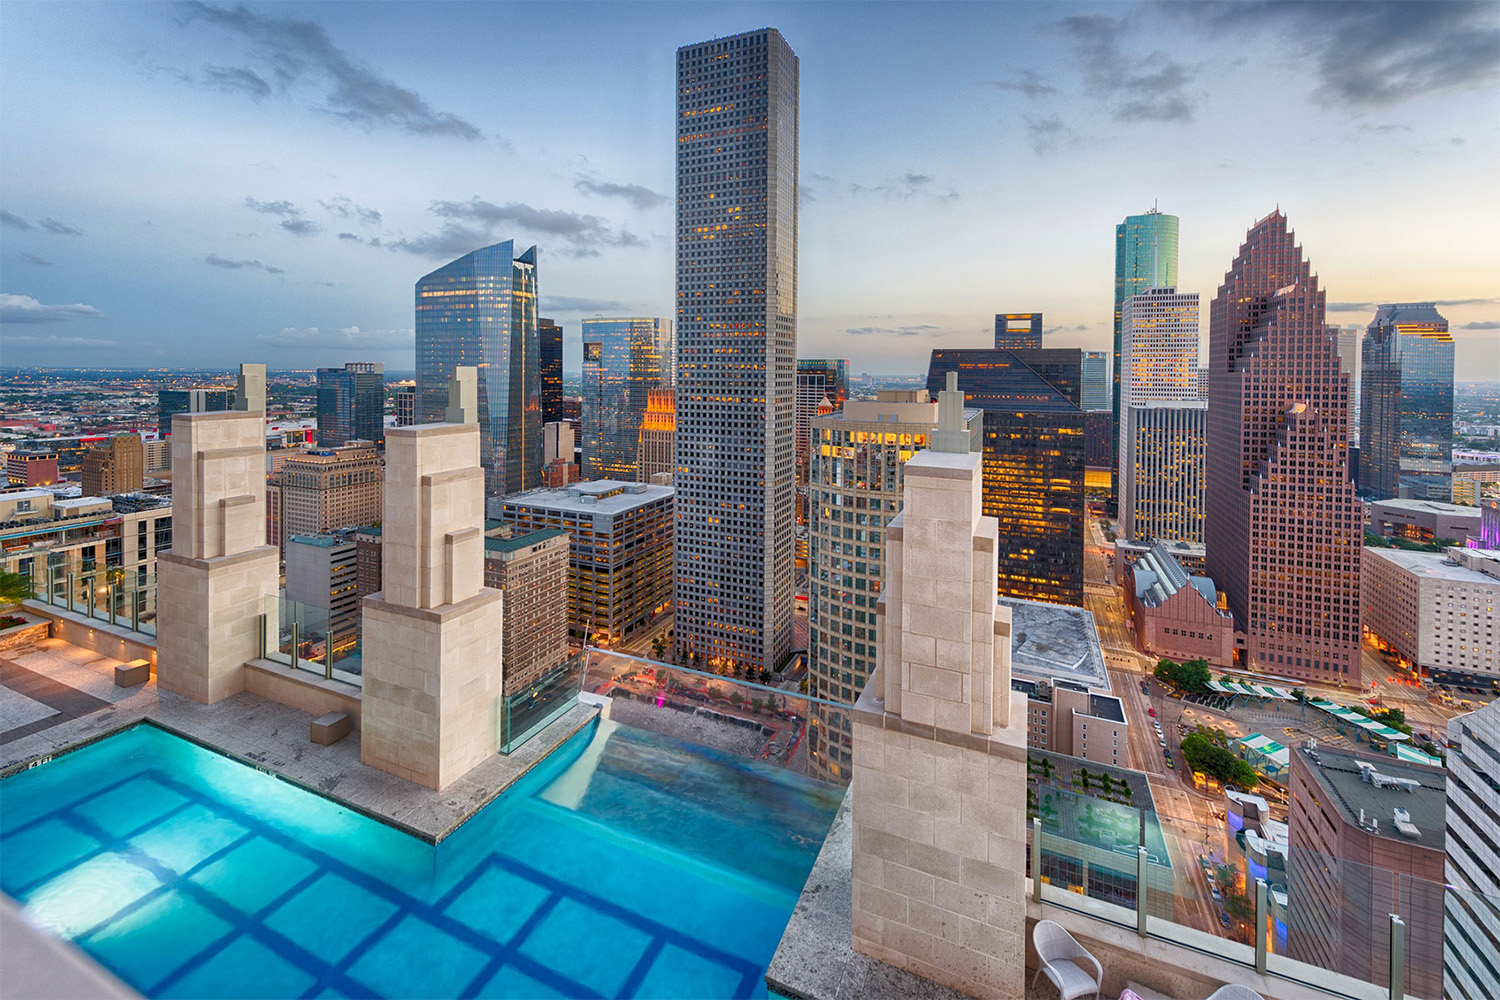 Rooftop pool at Market Square Tower